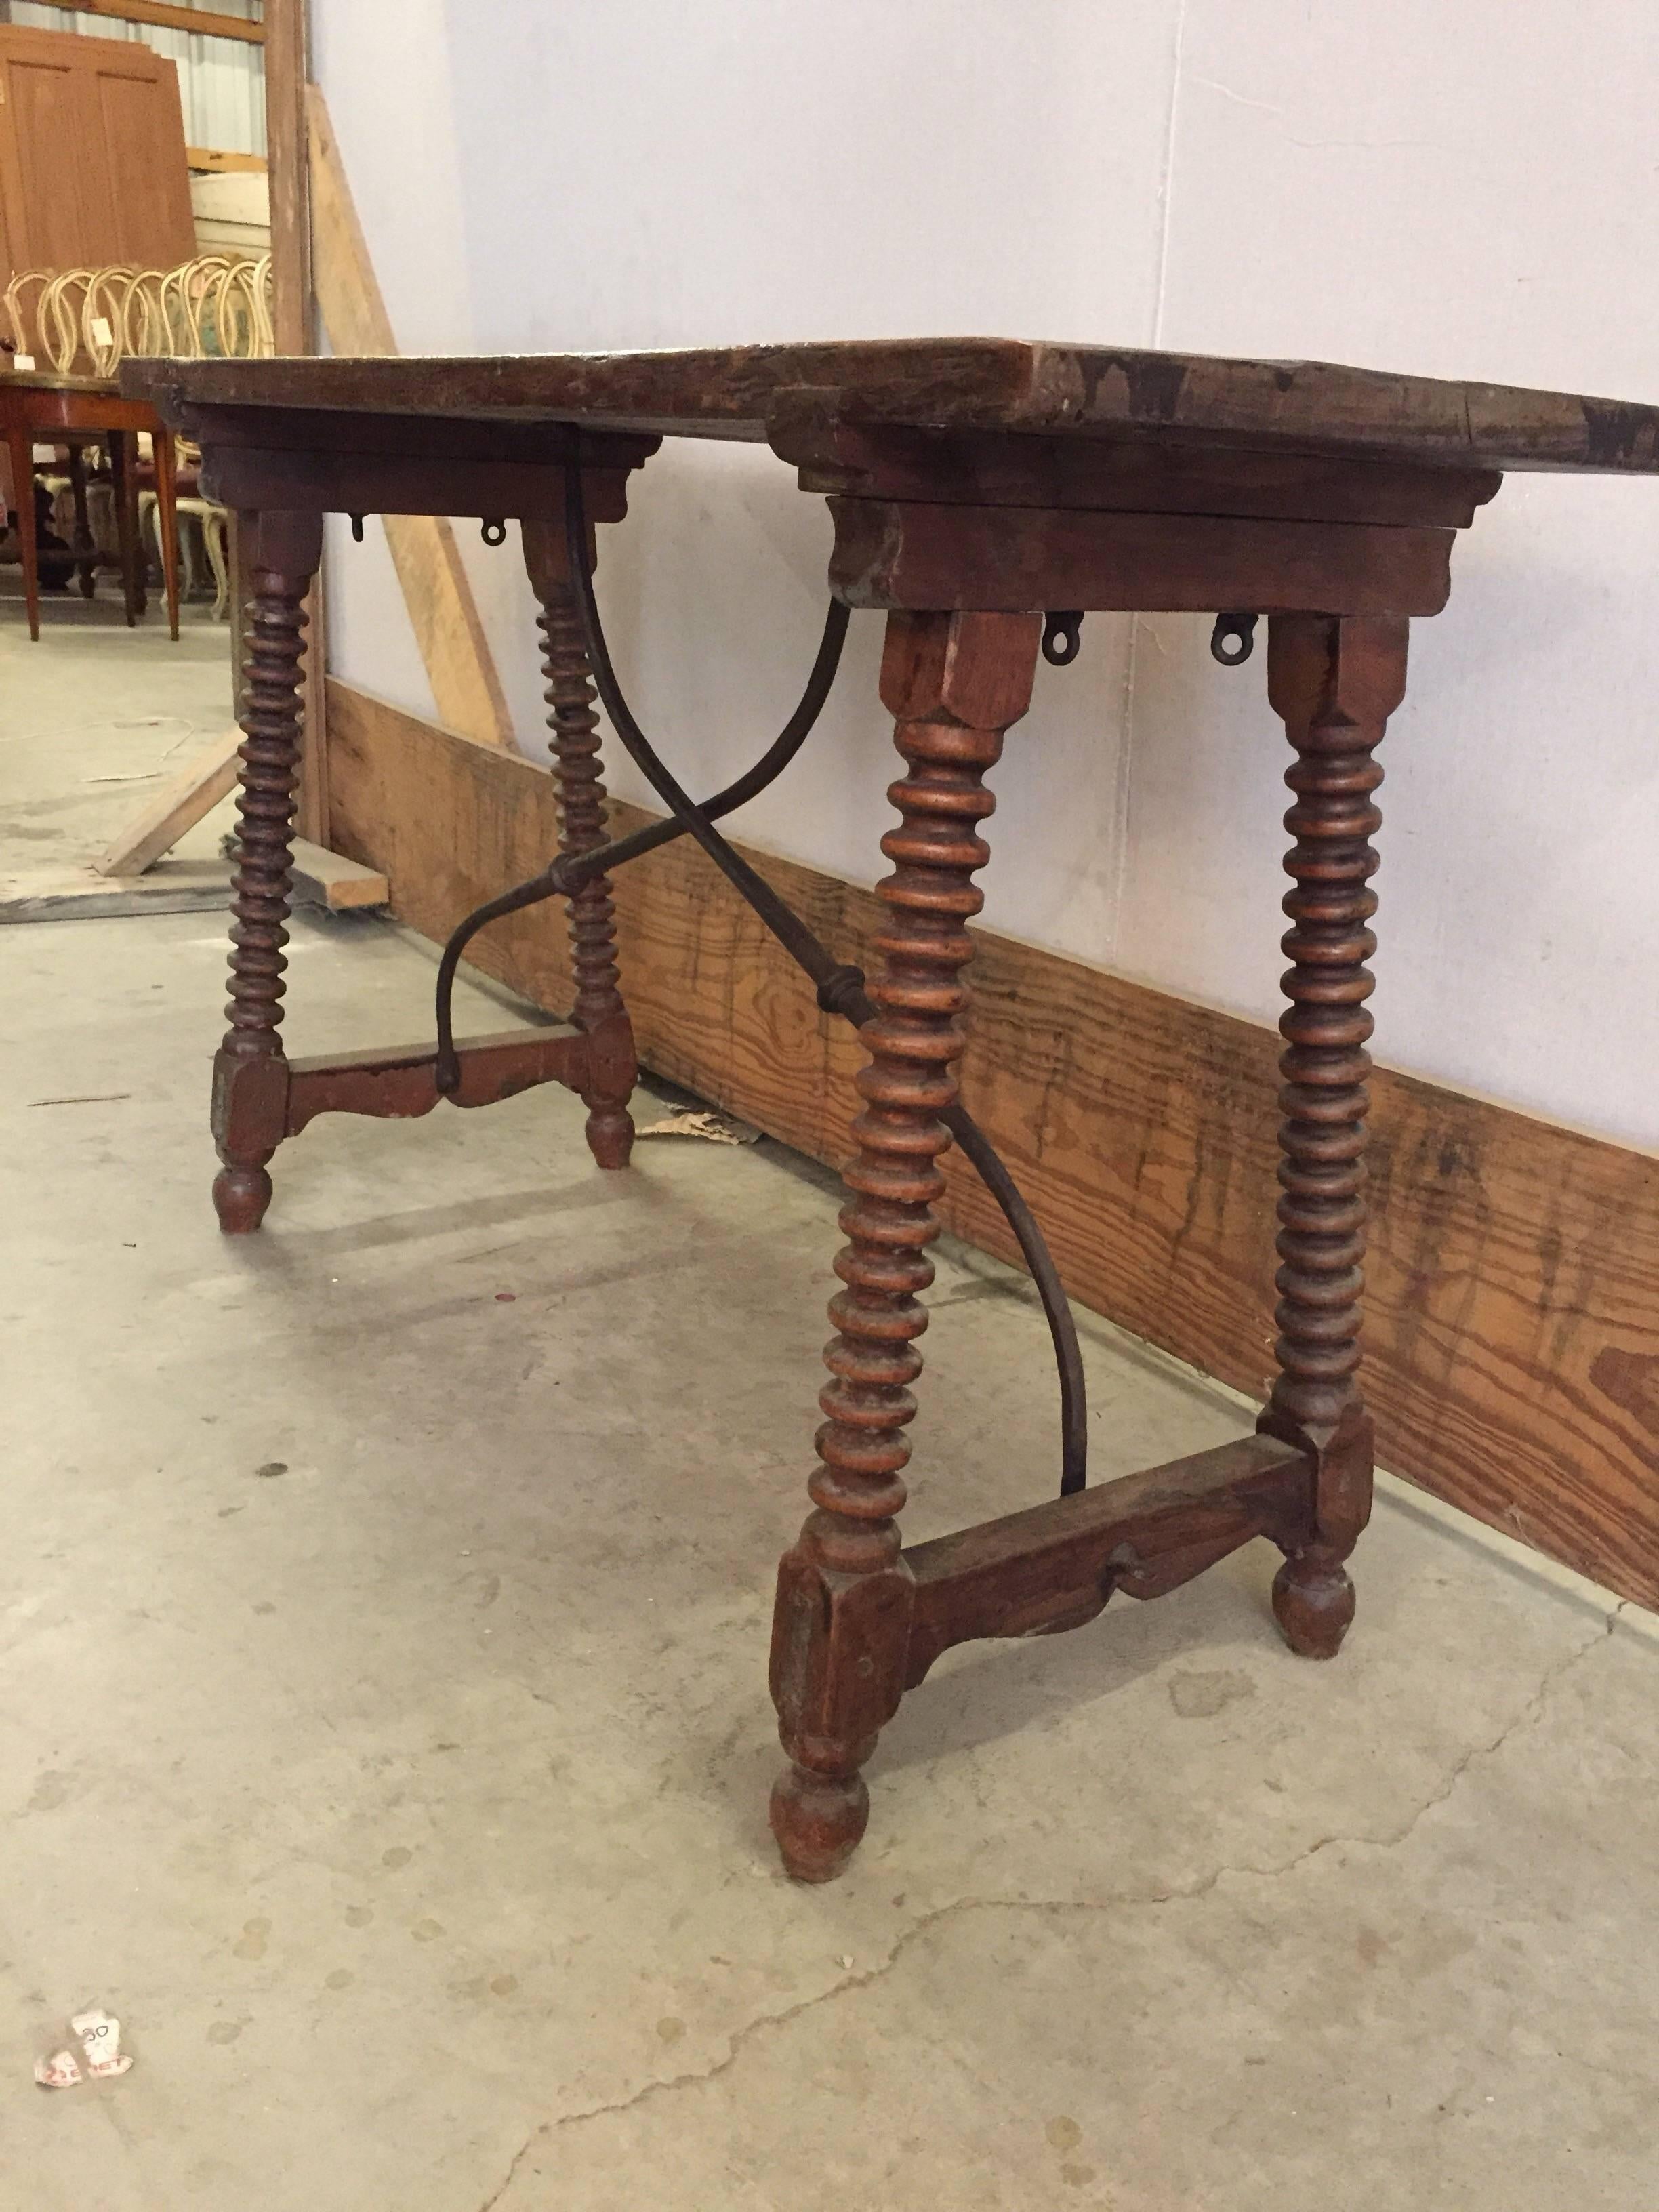 Walnut and wrought iron strap table with solid walnut top. Beautiful carved bobbin style legs, beautiful wrought iron stretchers.